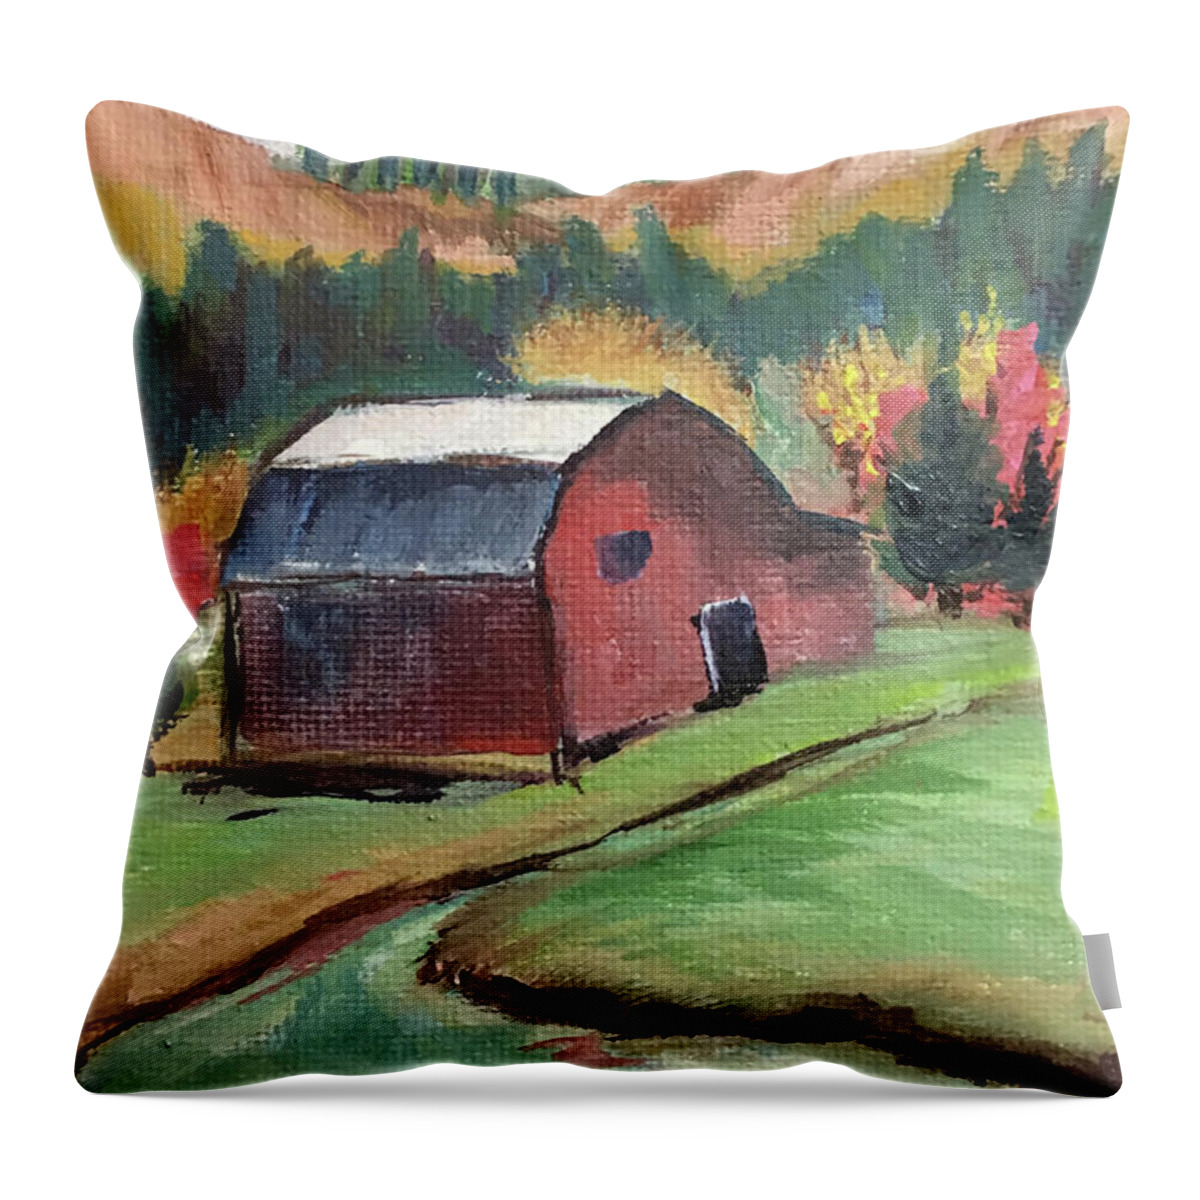 Barn Throw Pillow featuring the painting The Creek by Roxy Rich